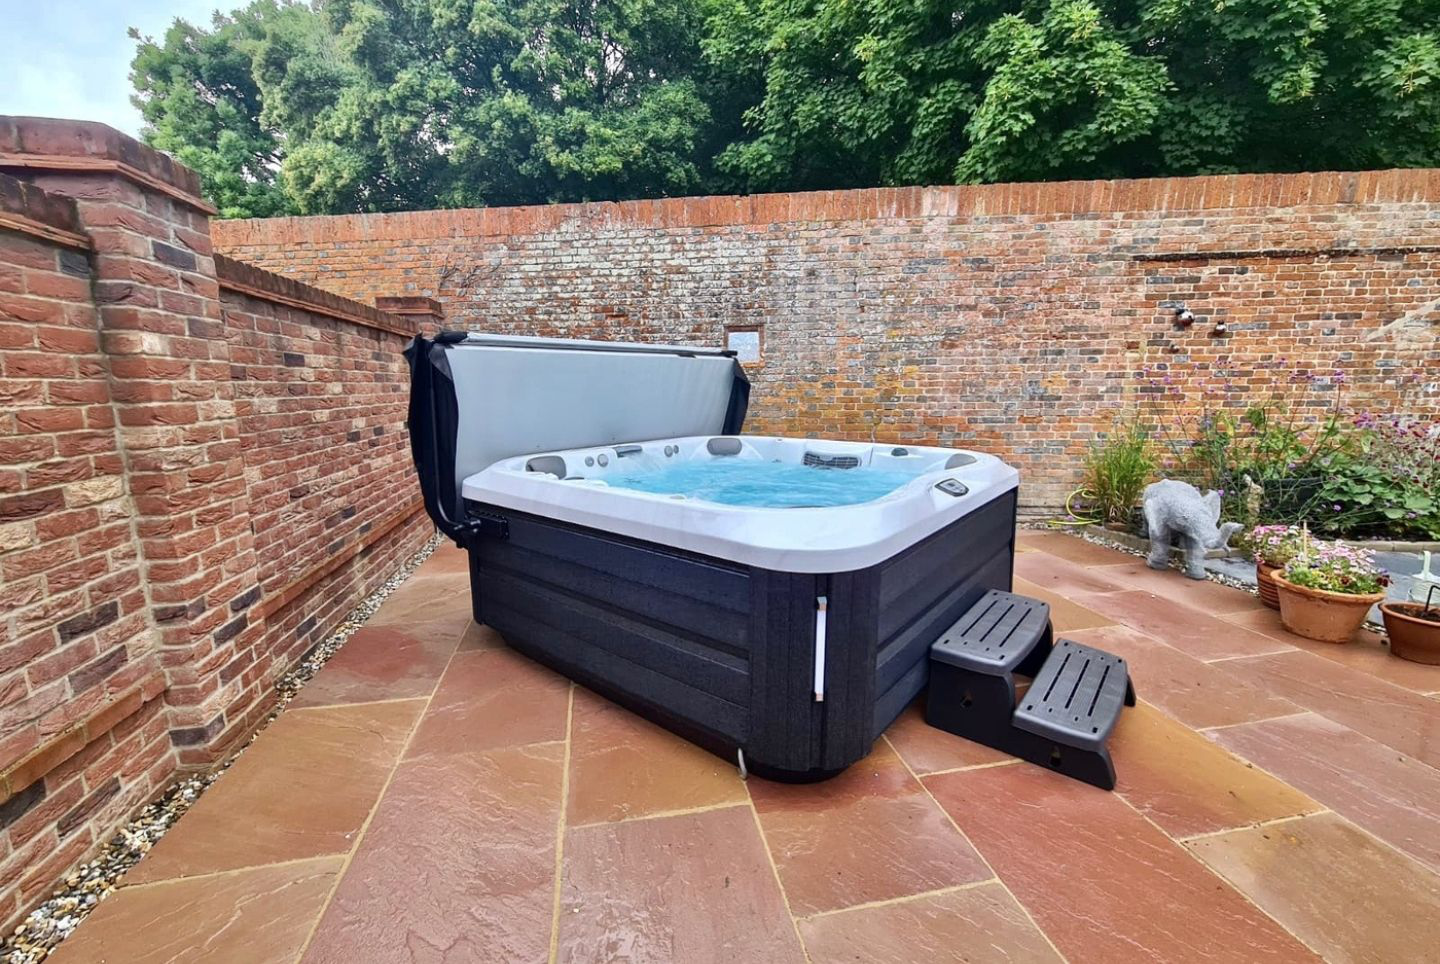 How to choose the perfect location for your hot tub